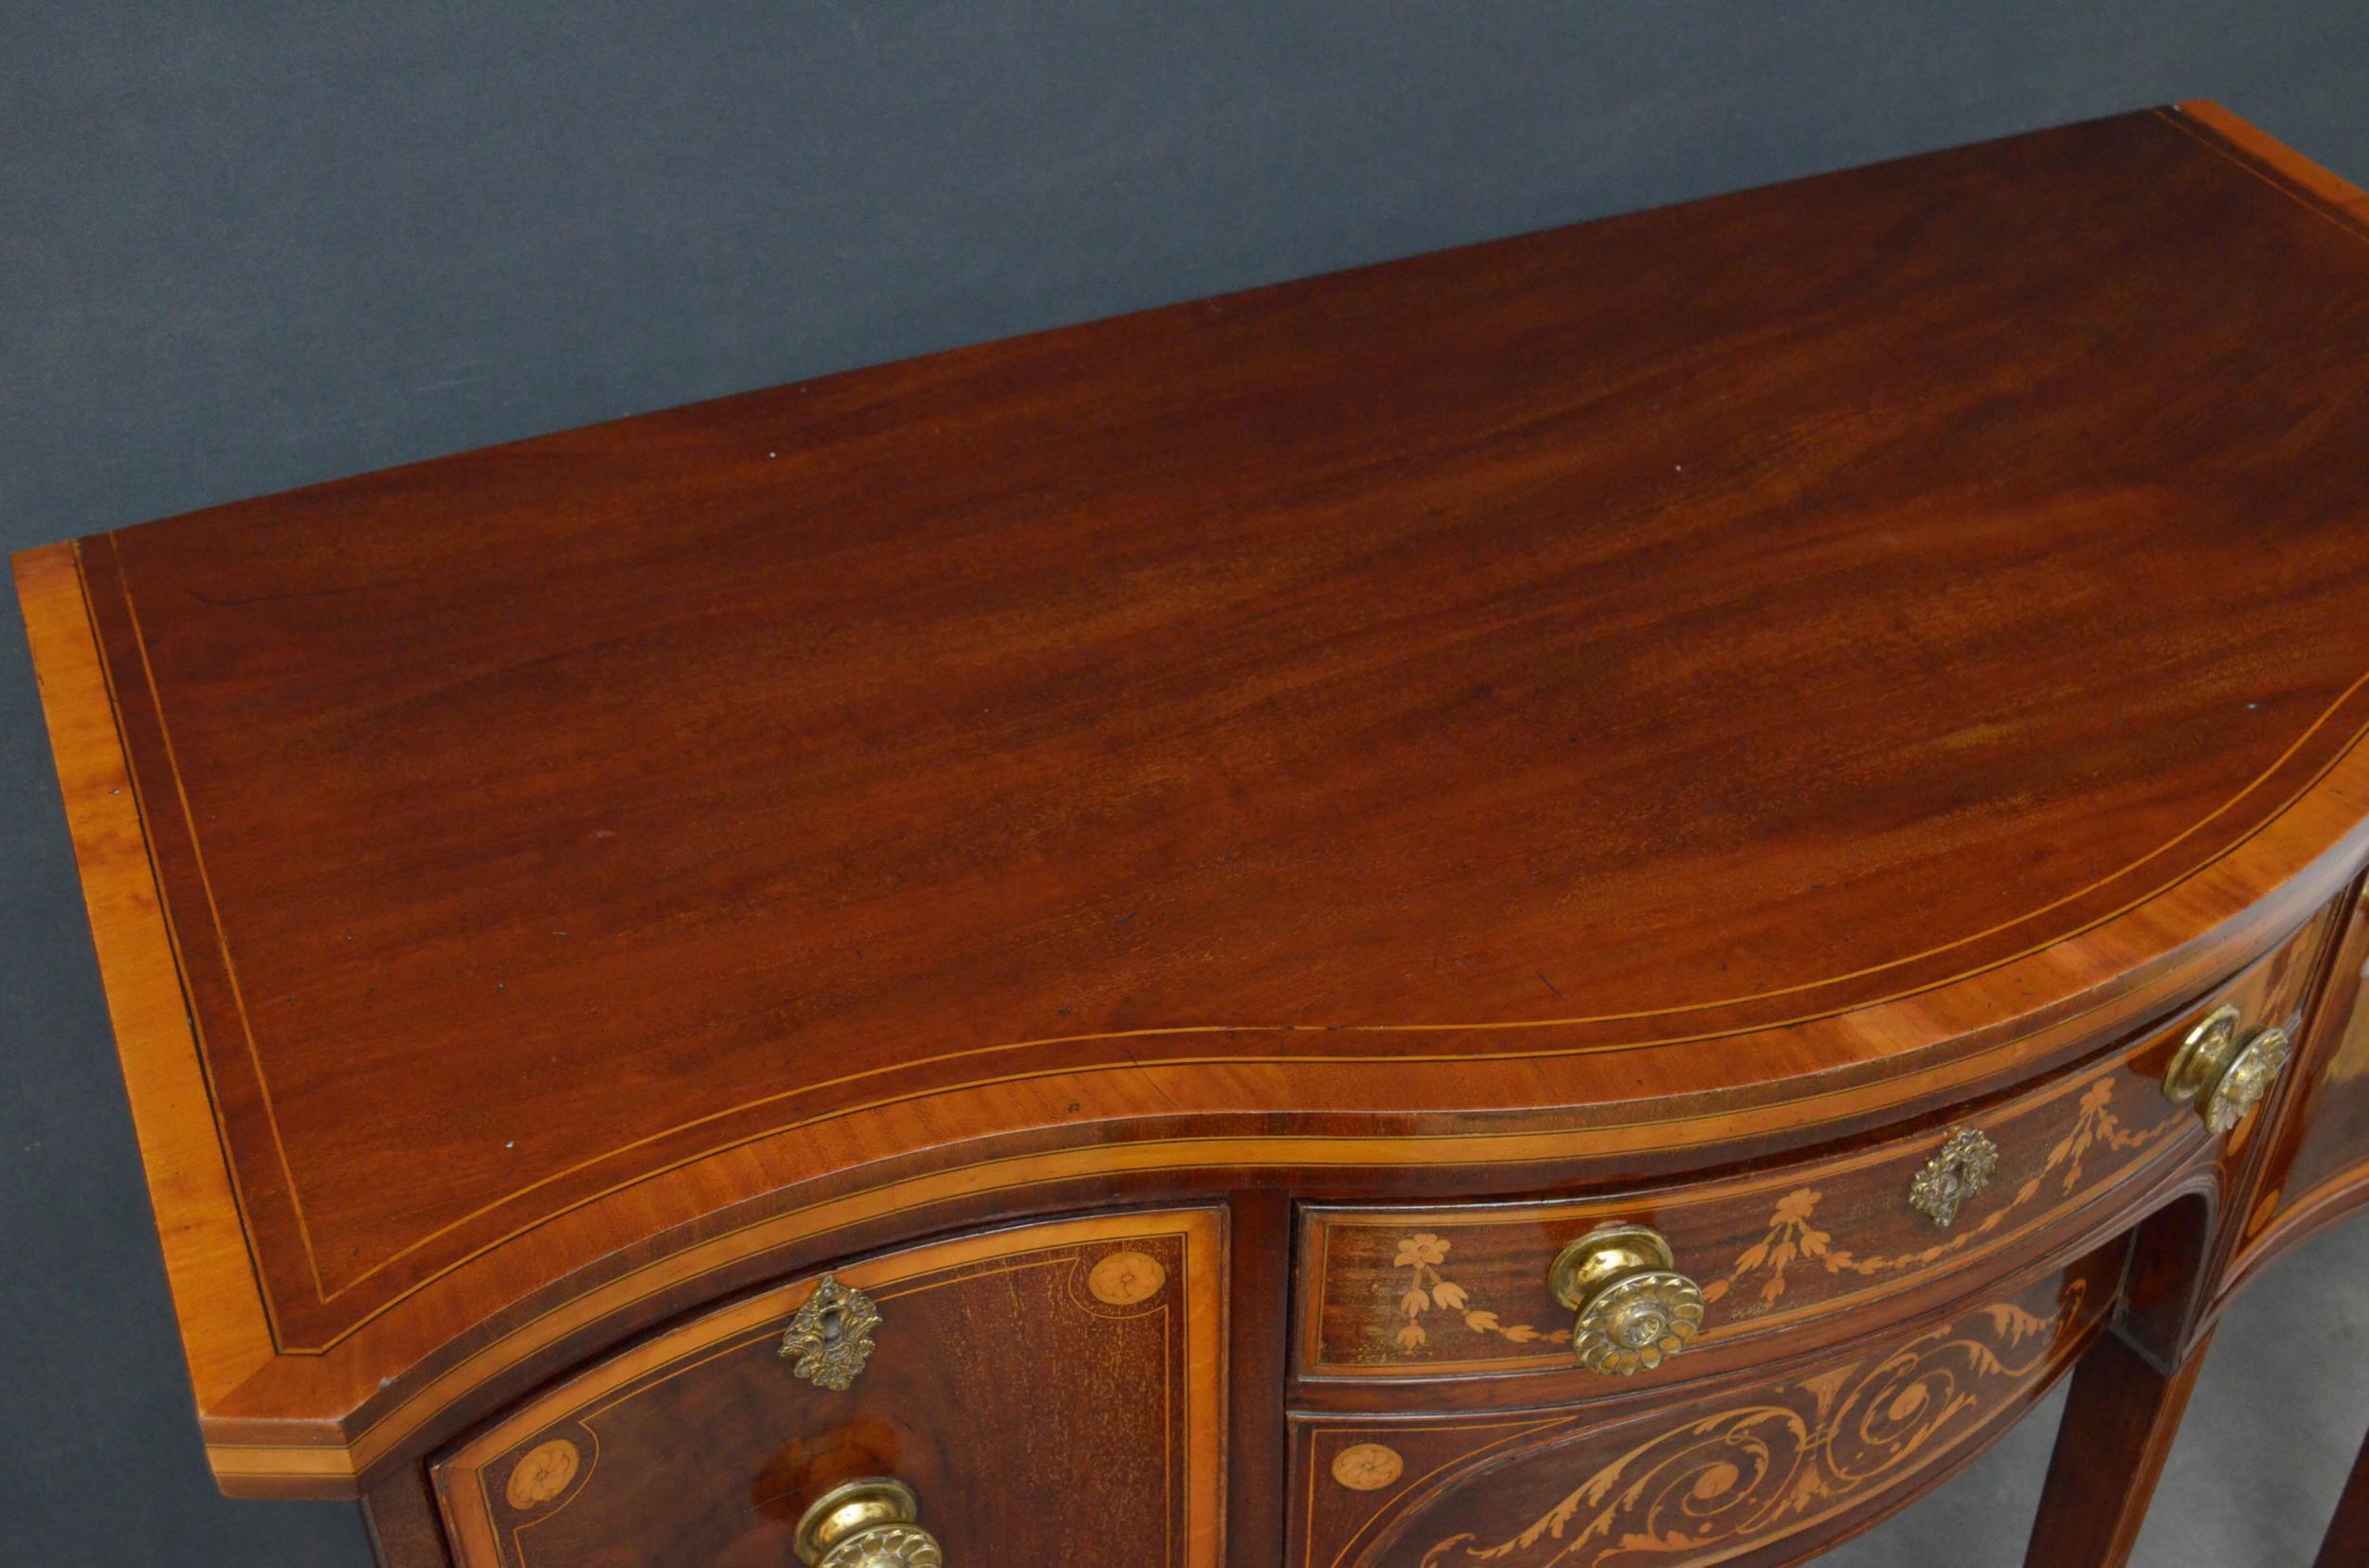 Sn4911 Fine quality George III mahogany sideboard of serpentine design, having figured mahogany top with satinwood stringing and satinwood crossbanded edge above deep centre drawer inlaid with neoclassical motifs flanked by two deep concave drawers